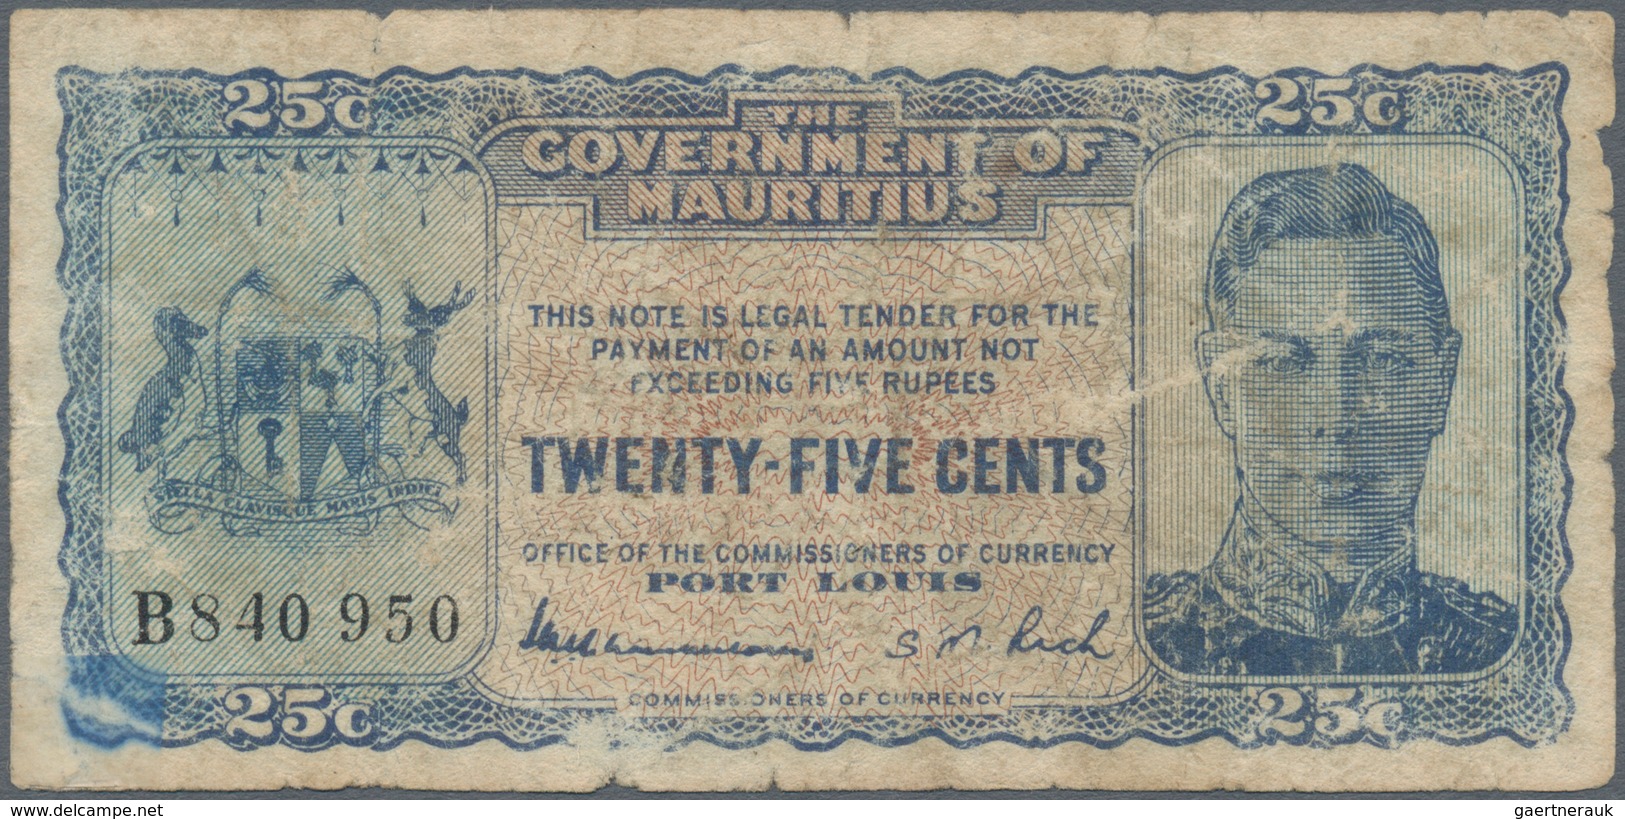 Mauritius: 25 Cents ND(1940) P. 24c, Used With Folds, Borders A Bit Worn, Minor Holes, No Repairs, N - Mauritius